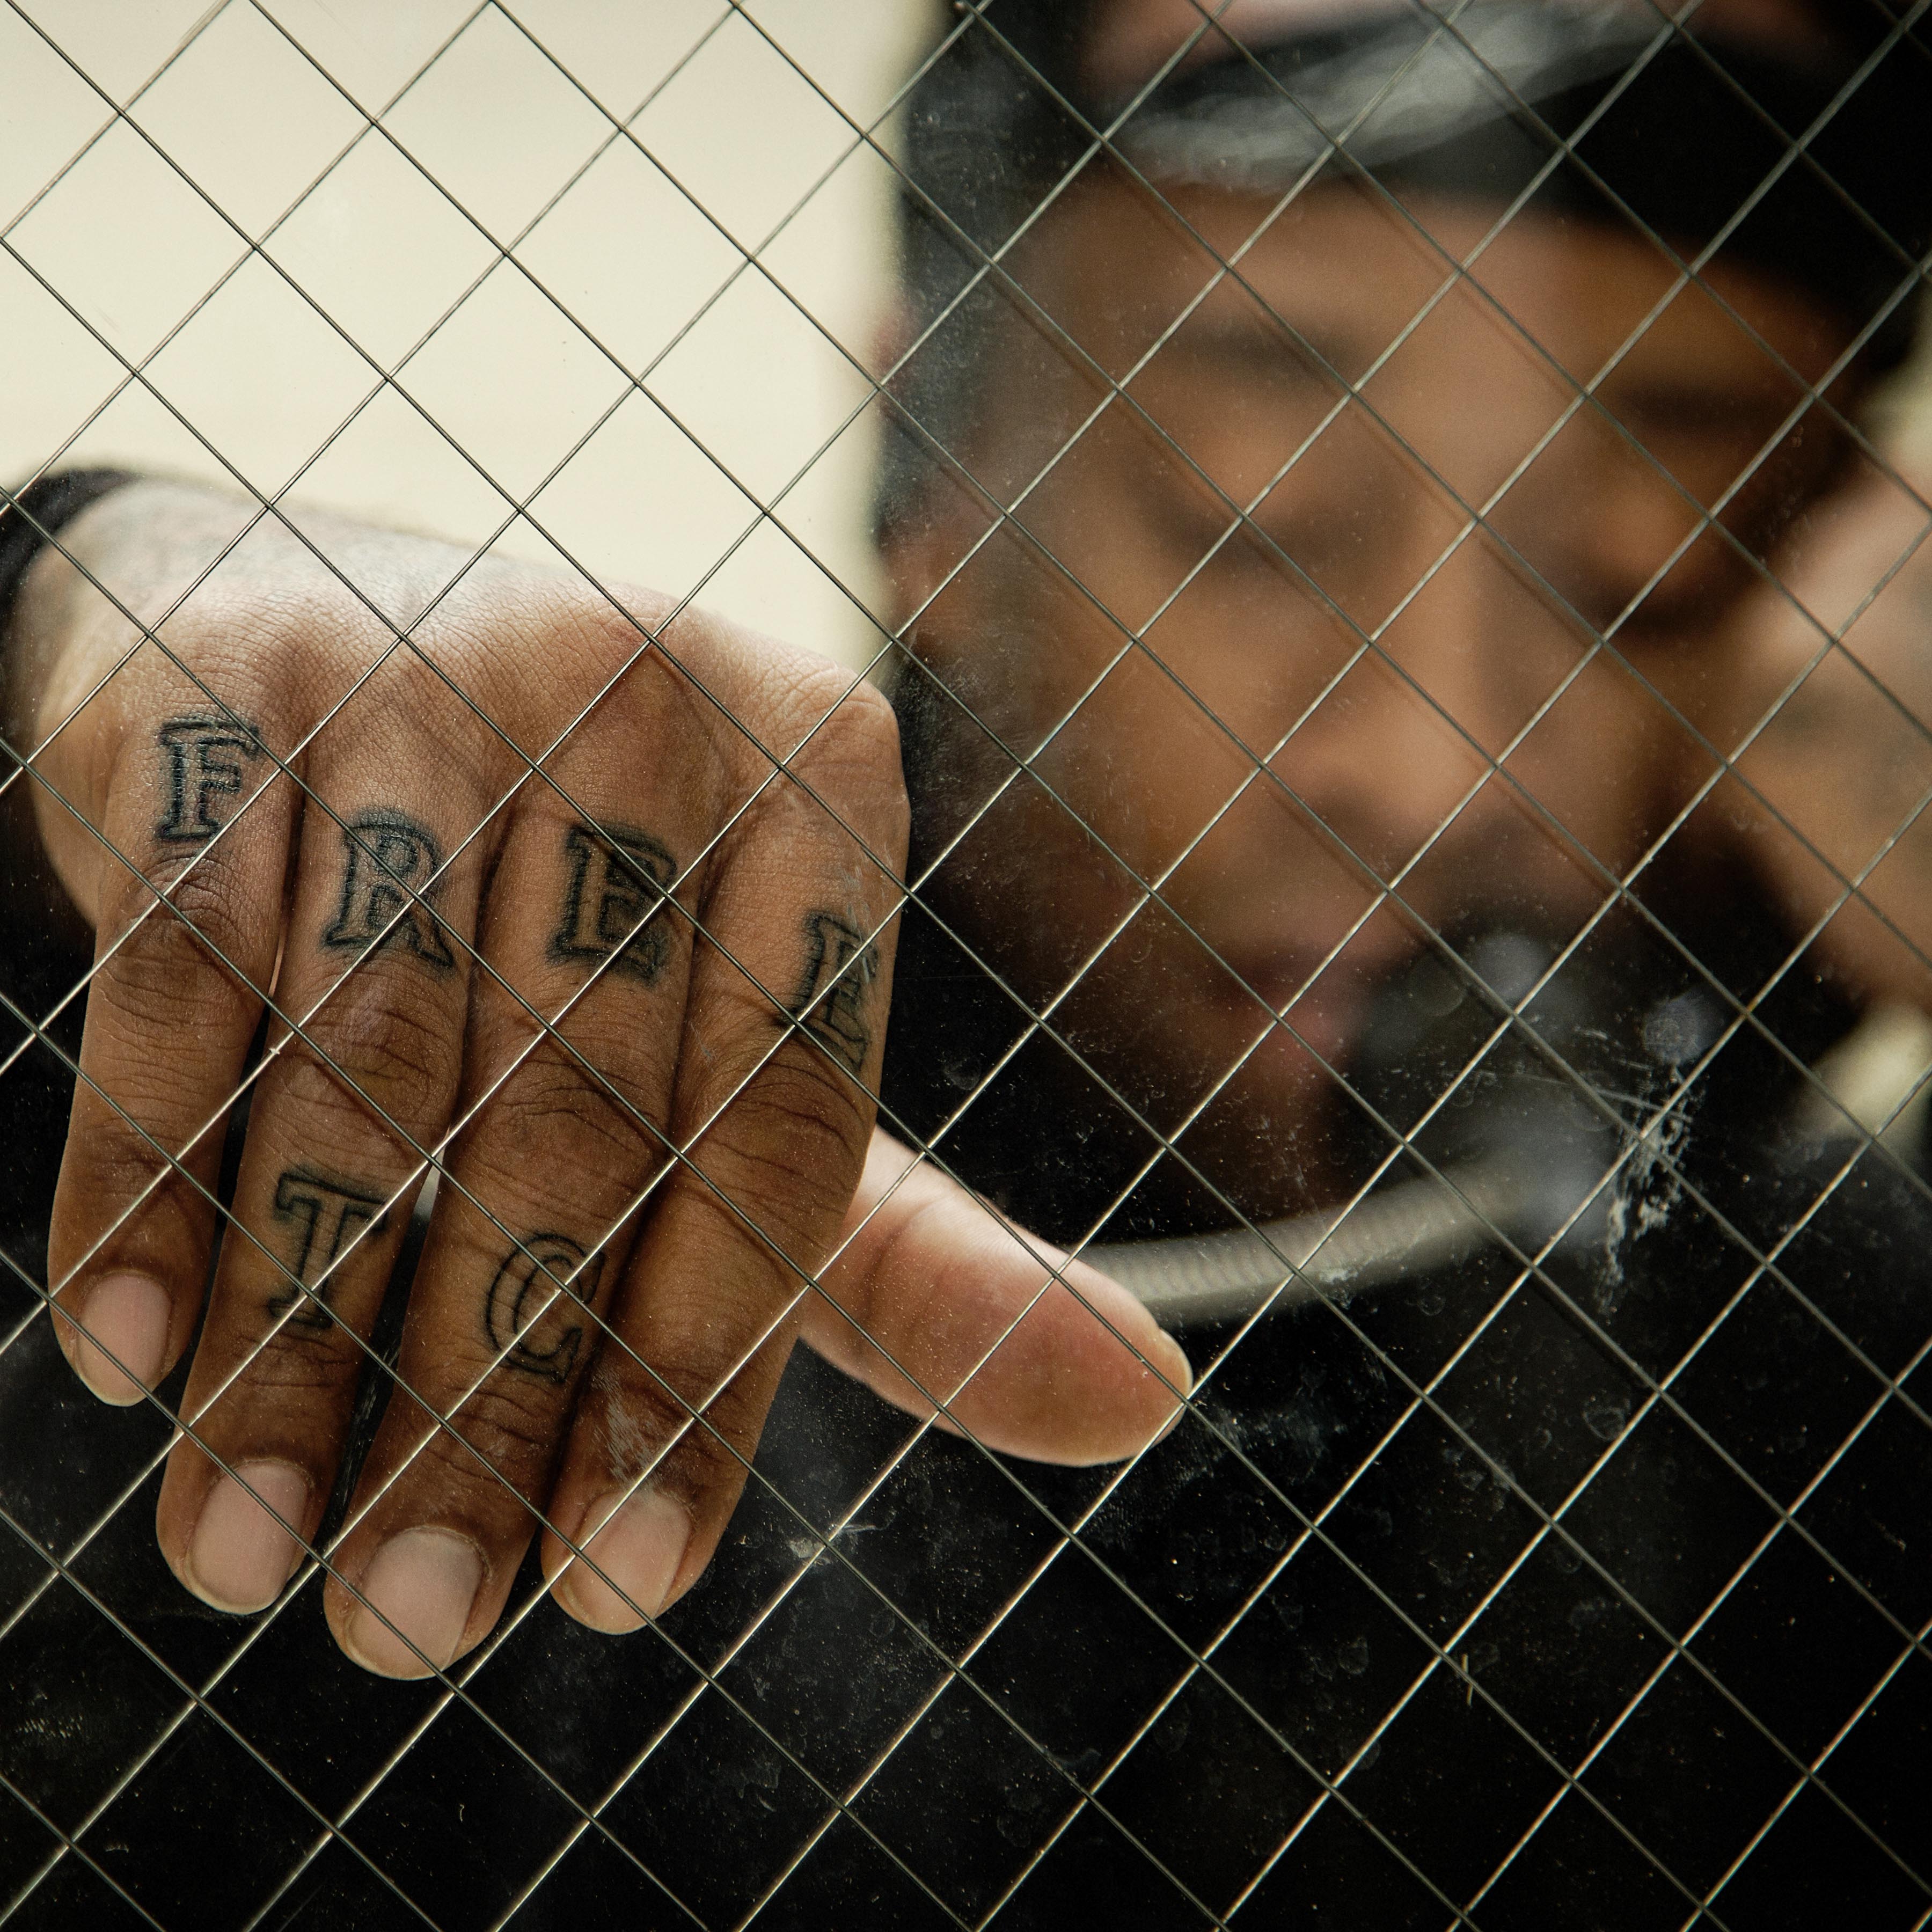 Ty Dolla $ign Enlists Jhené Aiko, Mustard for Motivational Track 'By Yourself'